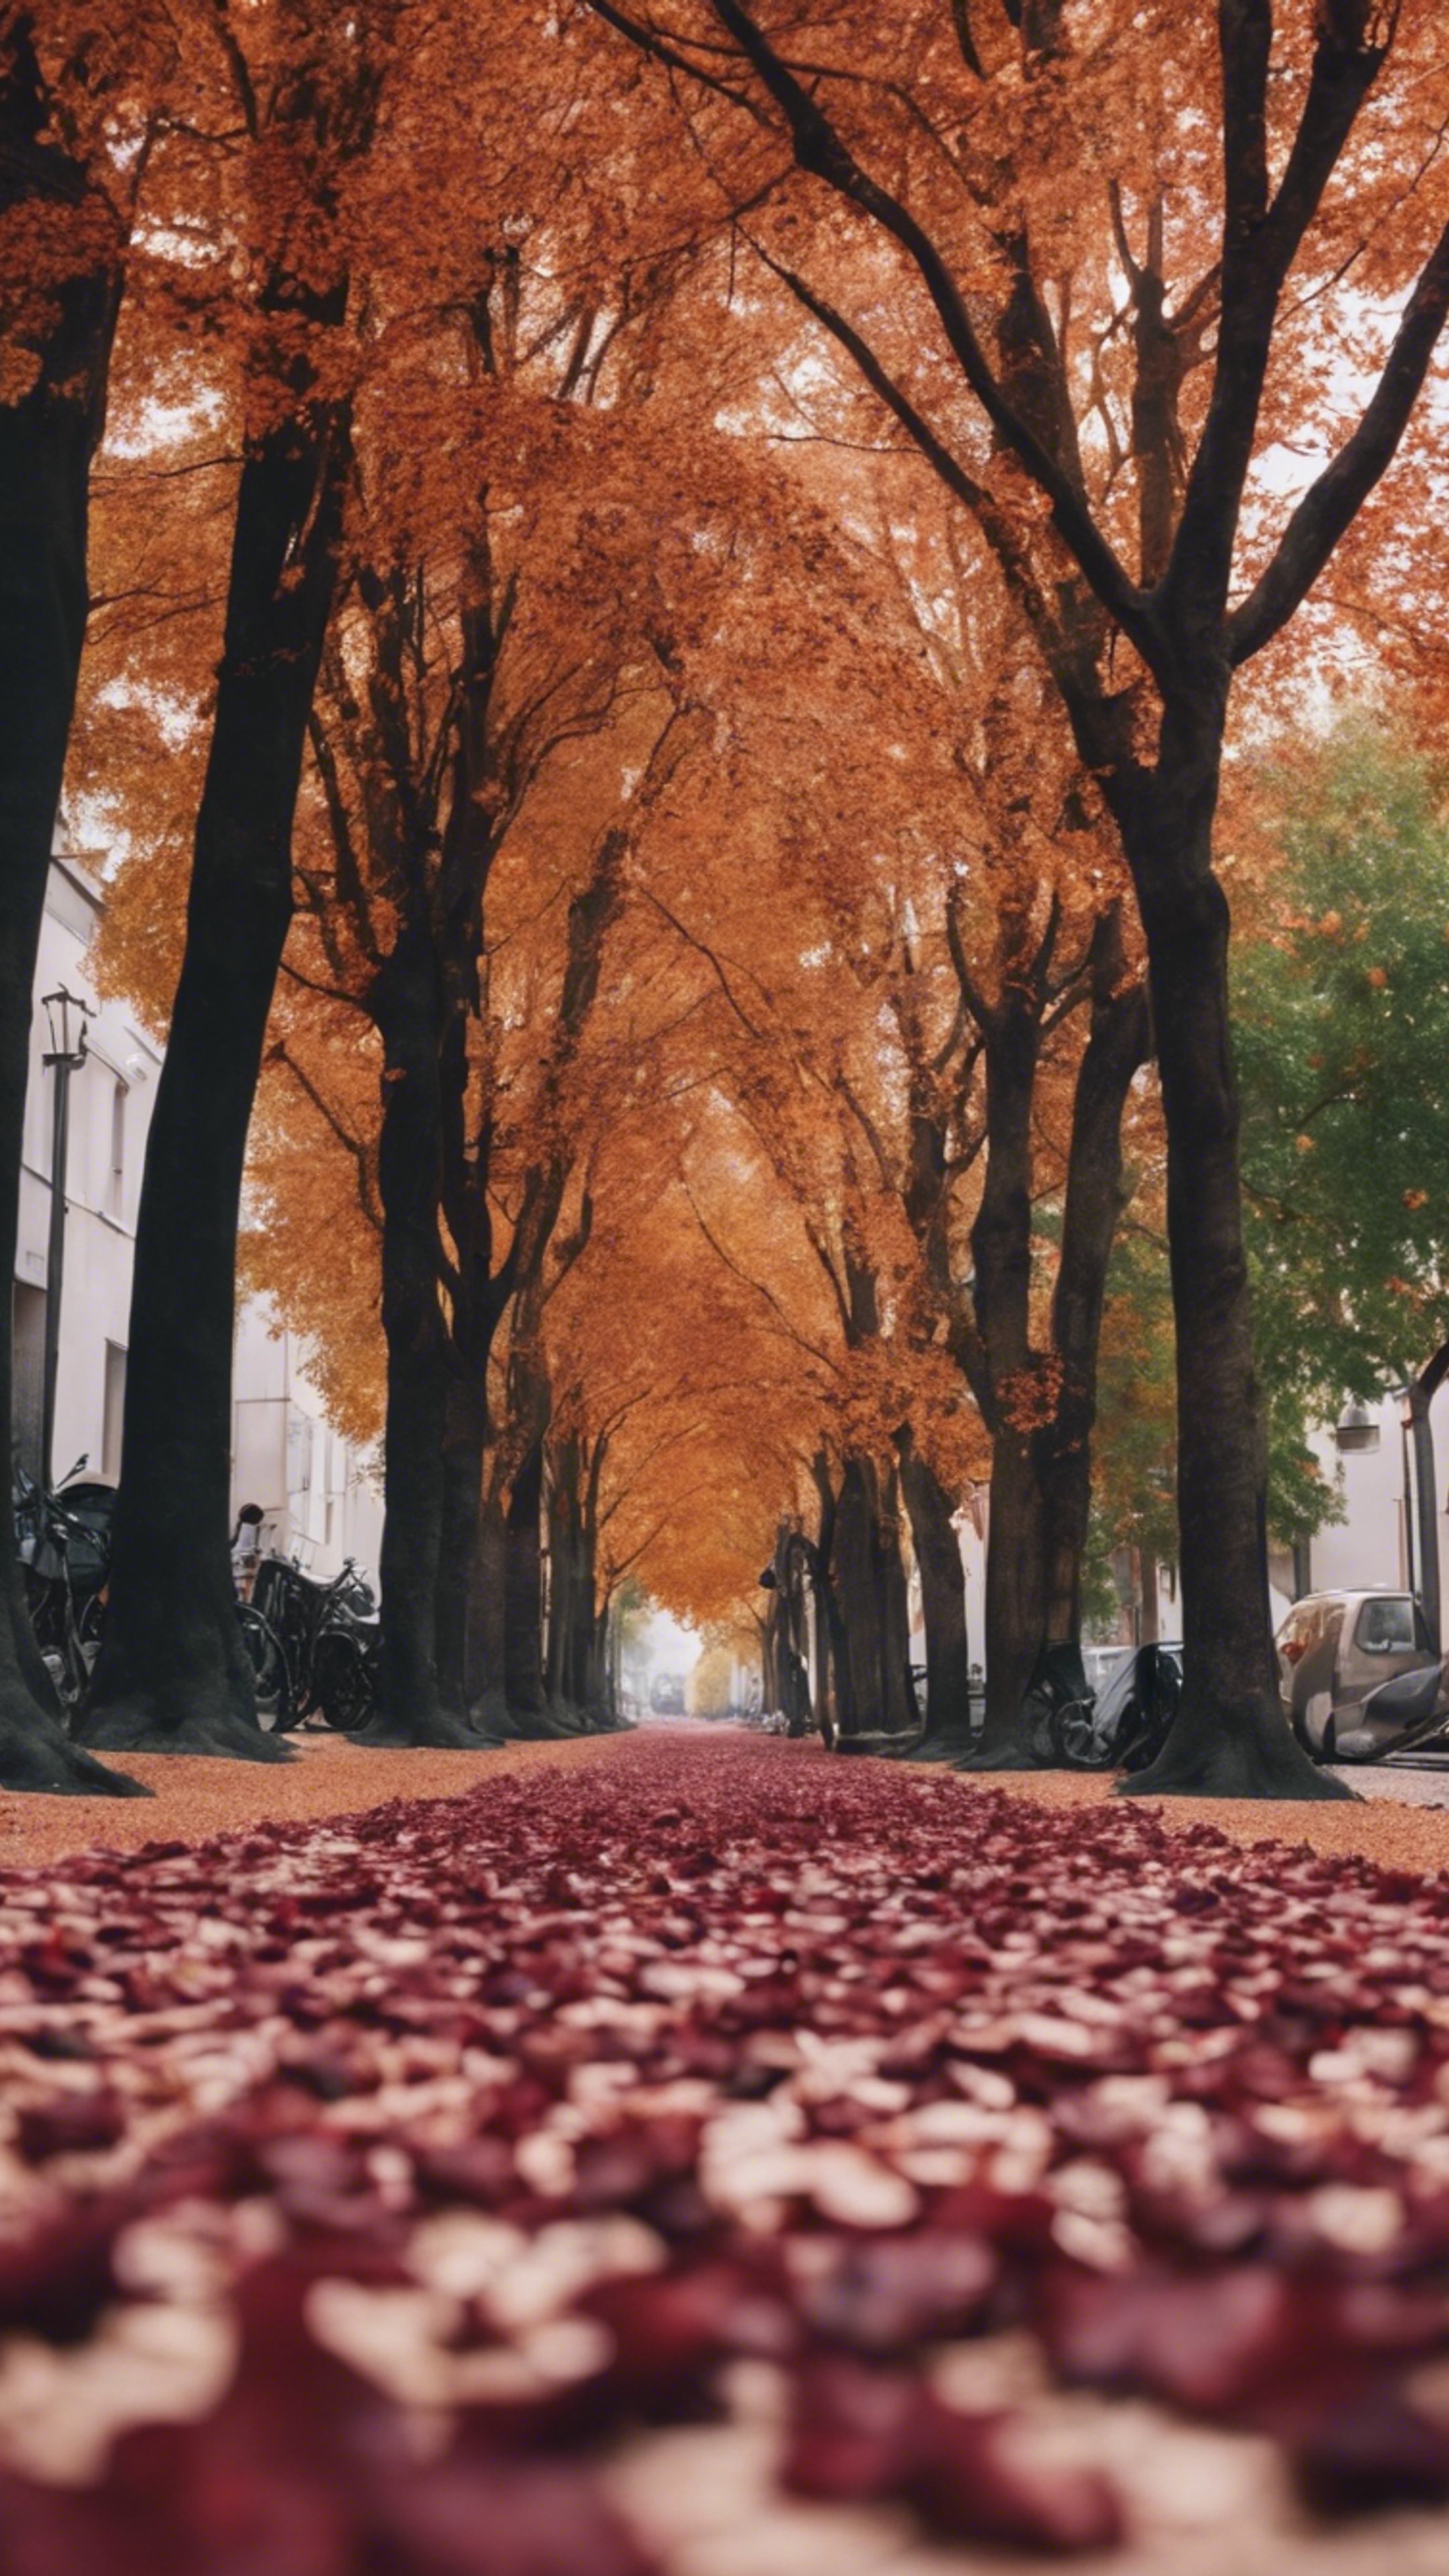 A street in autumn with burgundy leaves falling from the trees creating a beautiful comfortable carpet. Ფონი[db339216d700423d88d1]